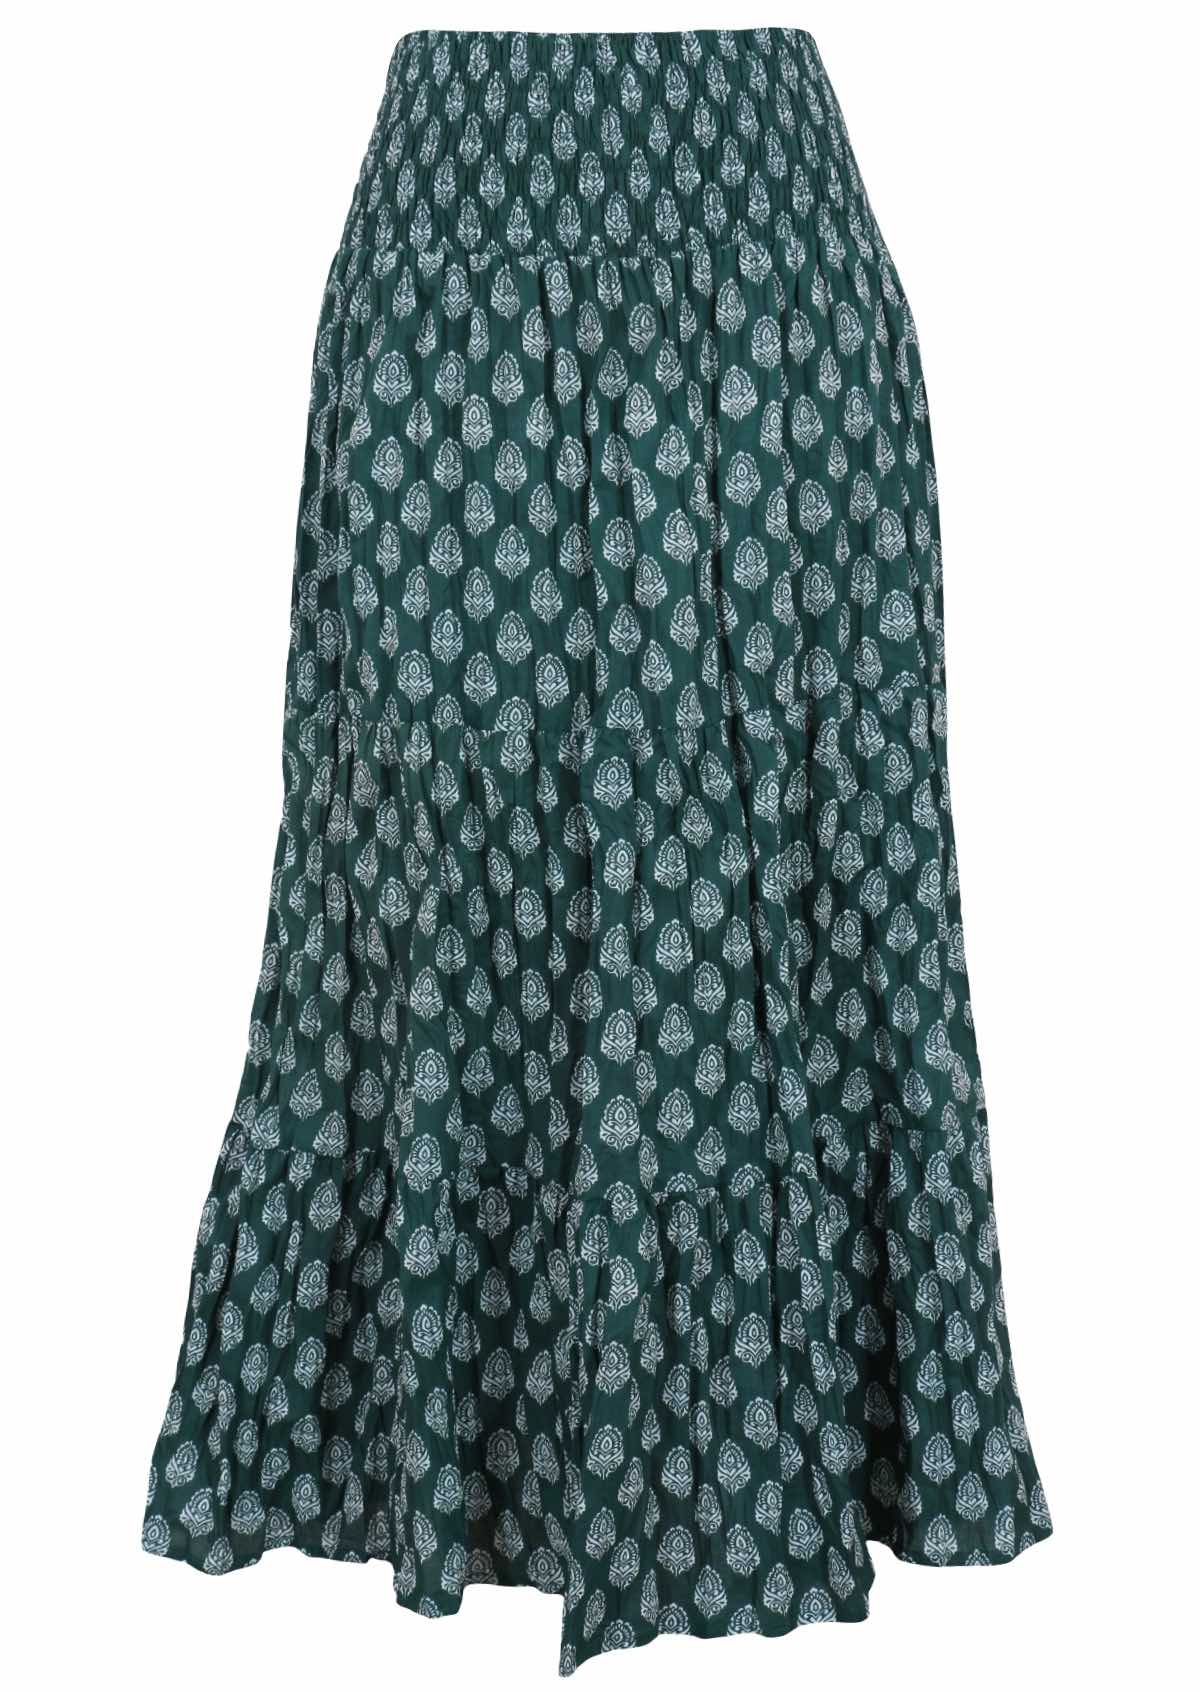 Three tiered cotton maxi skirt with shirred waistband for ultimate comfort